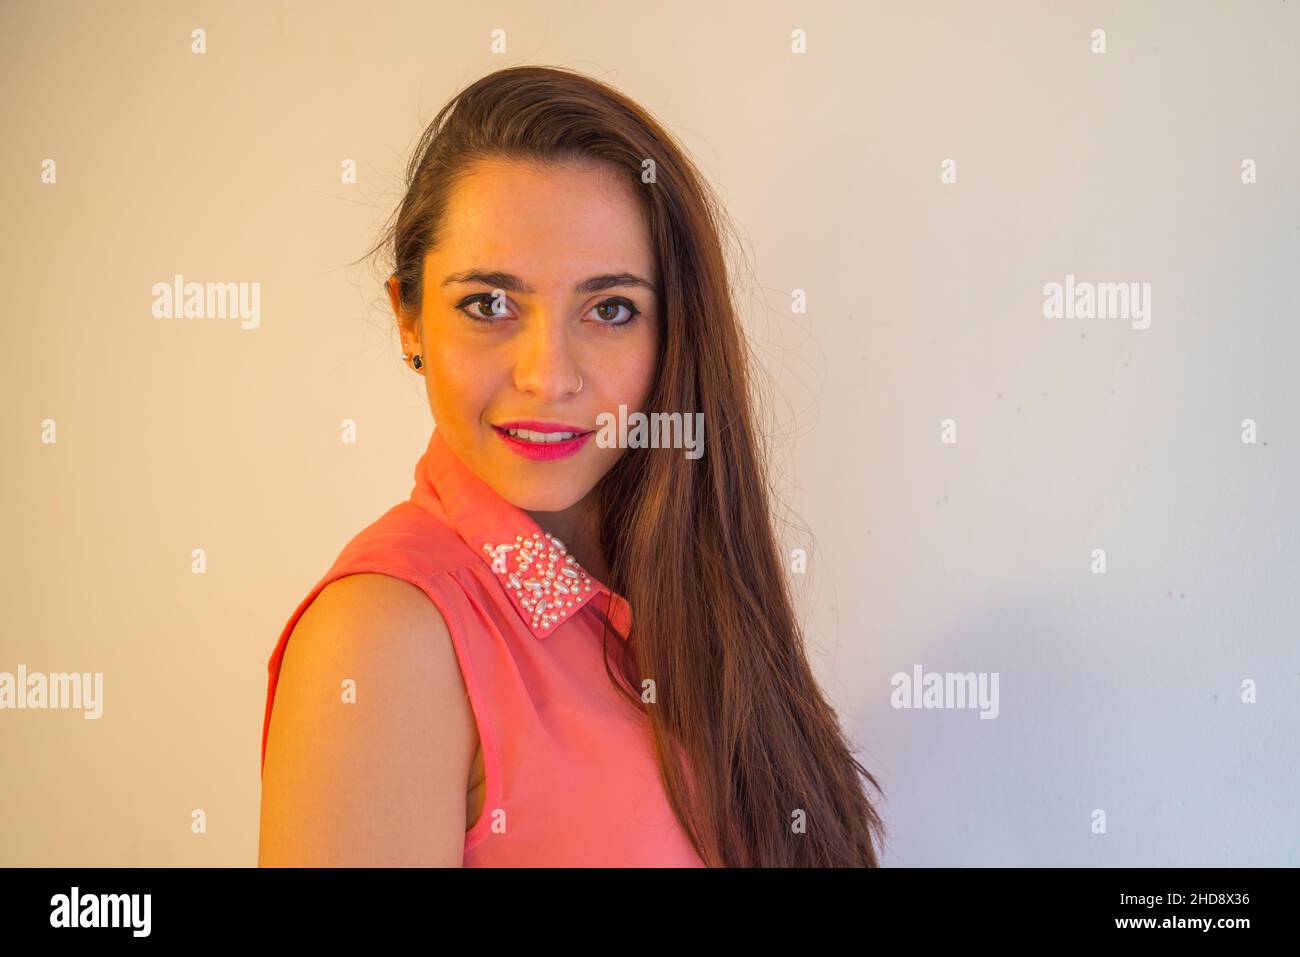 Young woman smiling and looking at the camera. Close view. Stock Photo